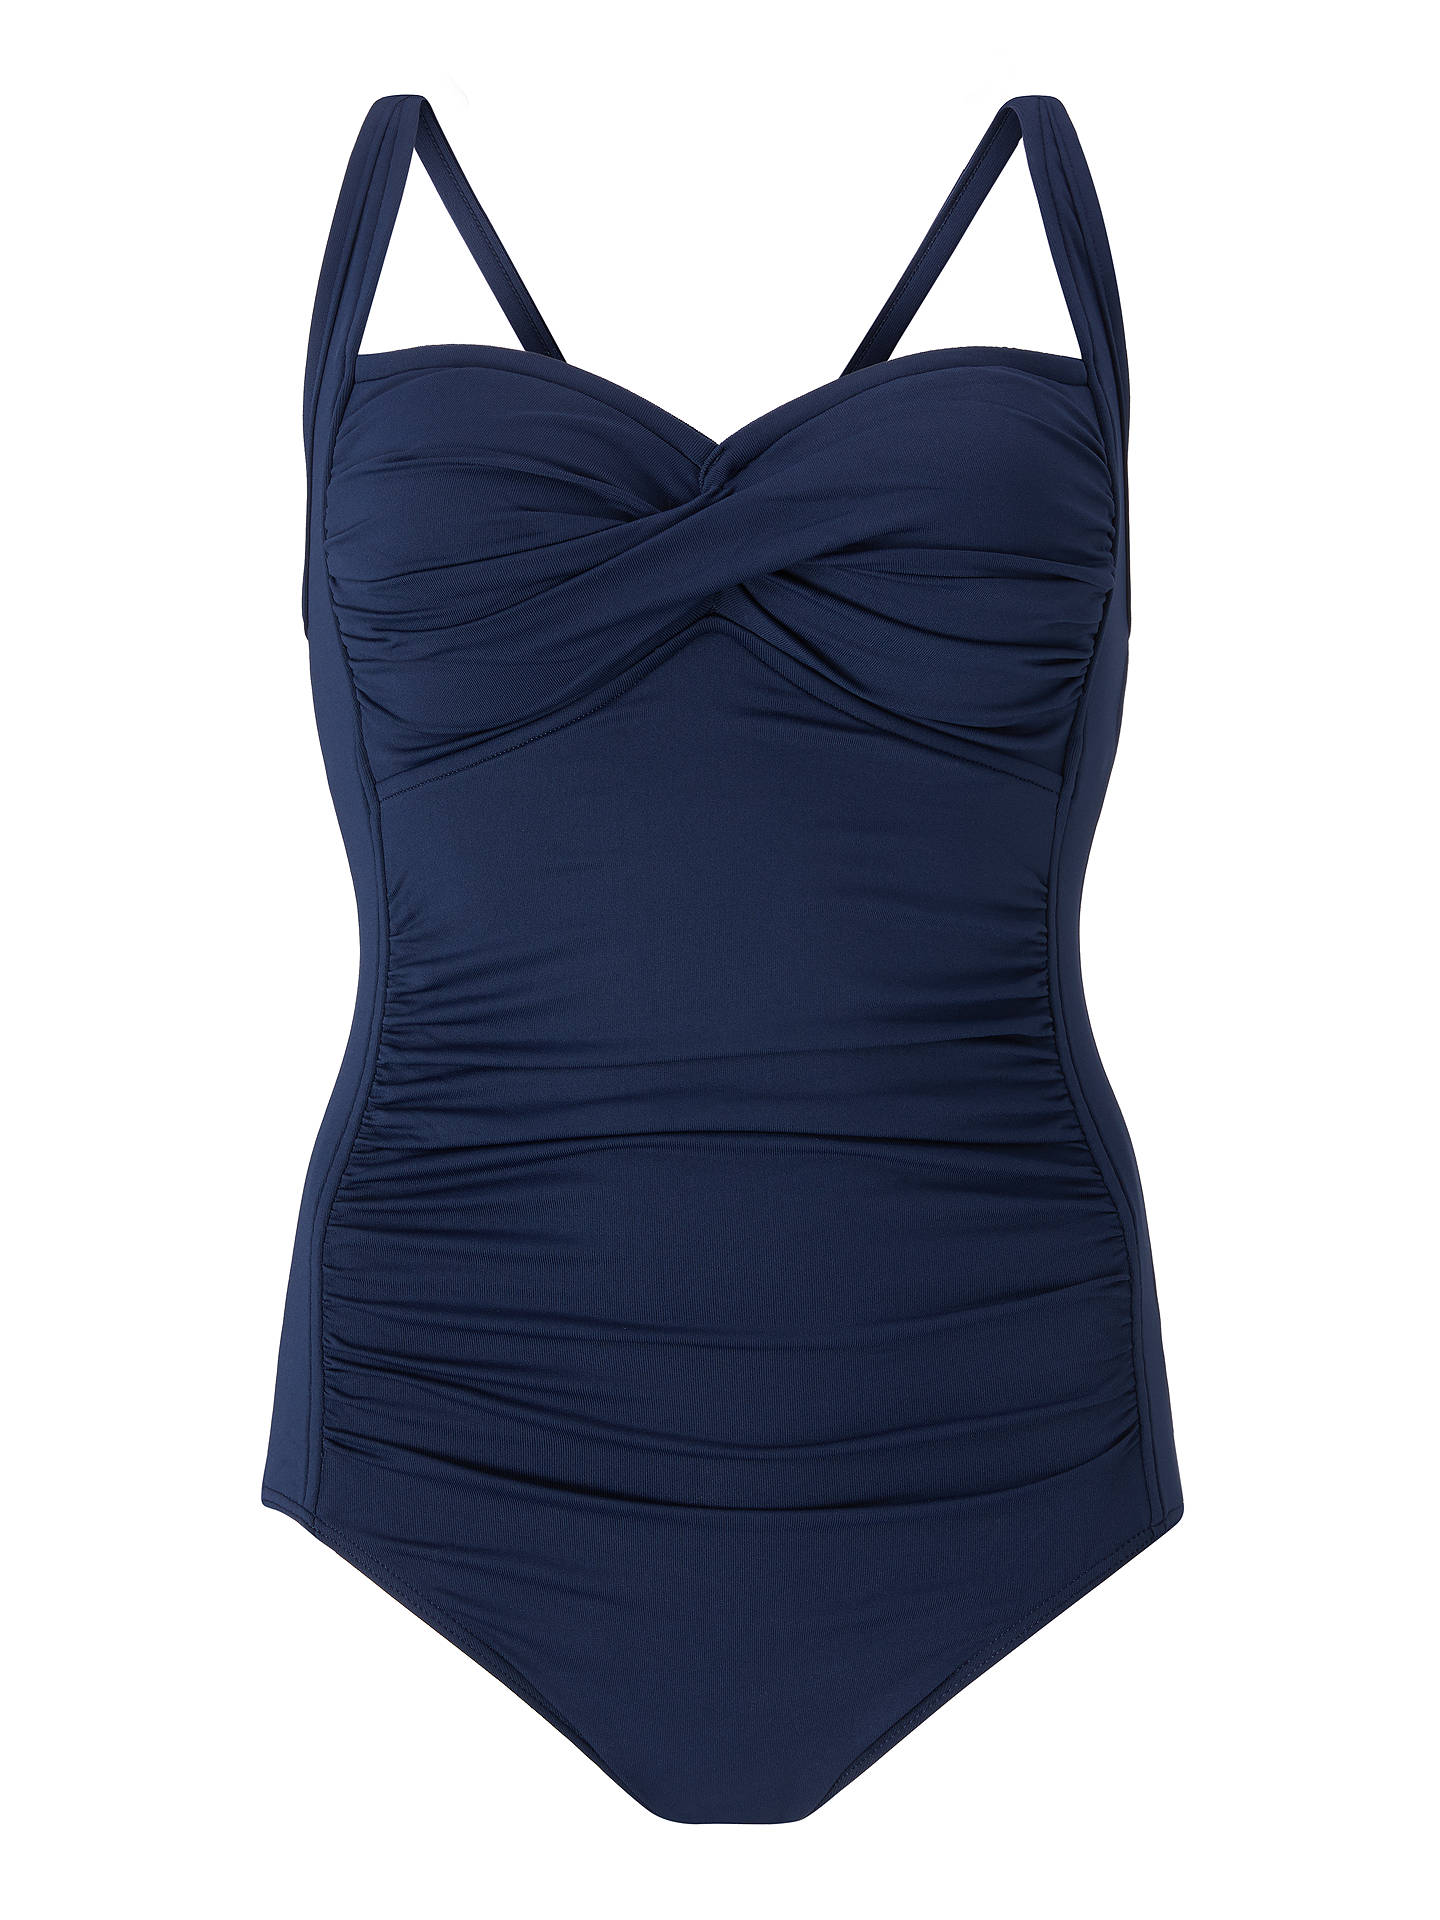 Seafolly Halterneck Swimsuit at John Lewis & Partners